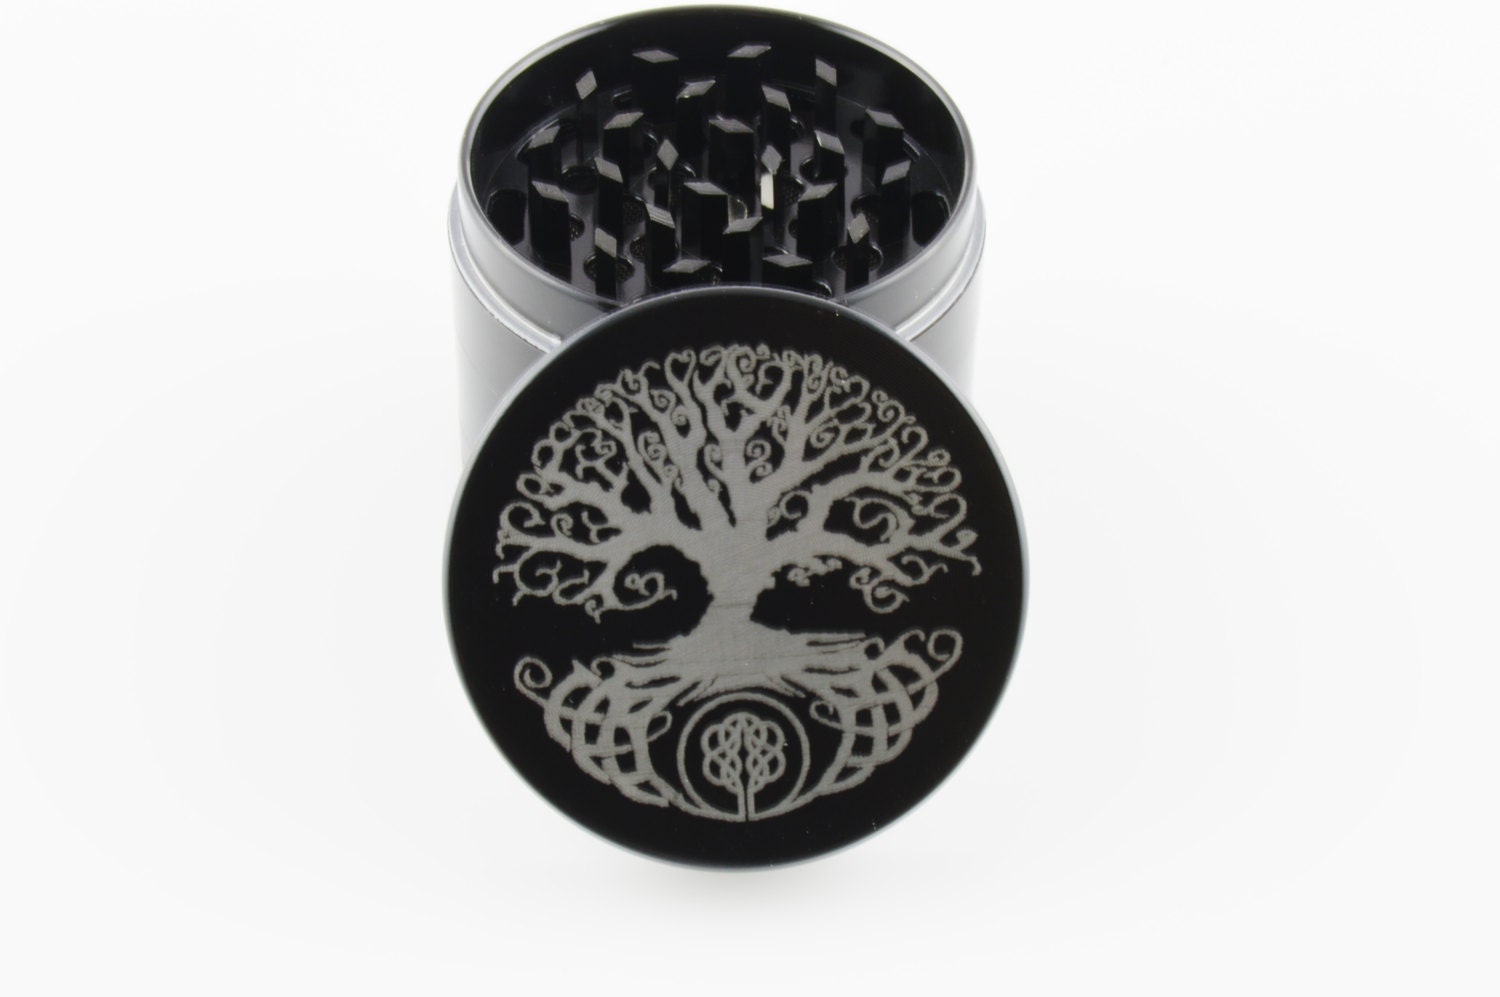 Tree of Life Herb Grinder 4 Piece Premium Etched Grinder Titanium Grinder  Large Grinder 2.5 Wide Original Art Swag Gear Gift Box 